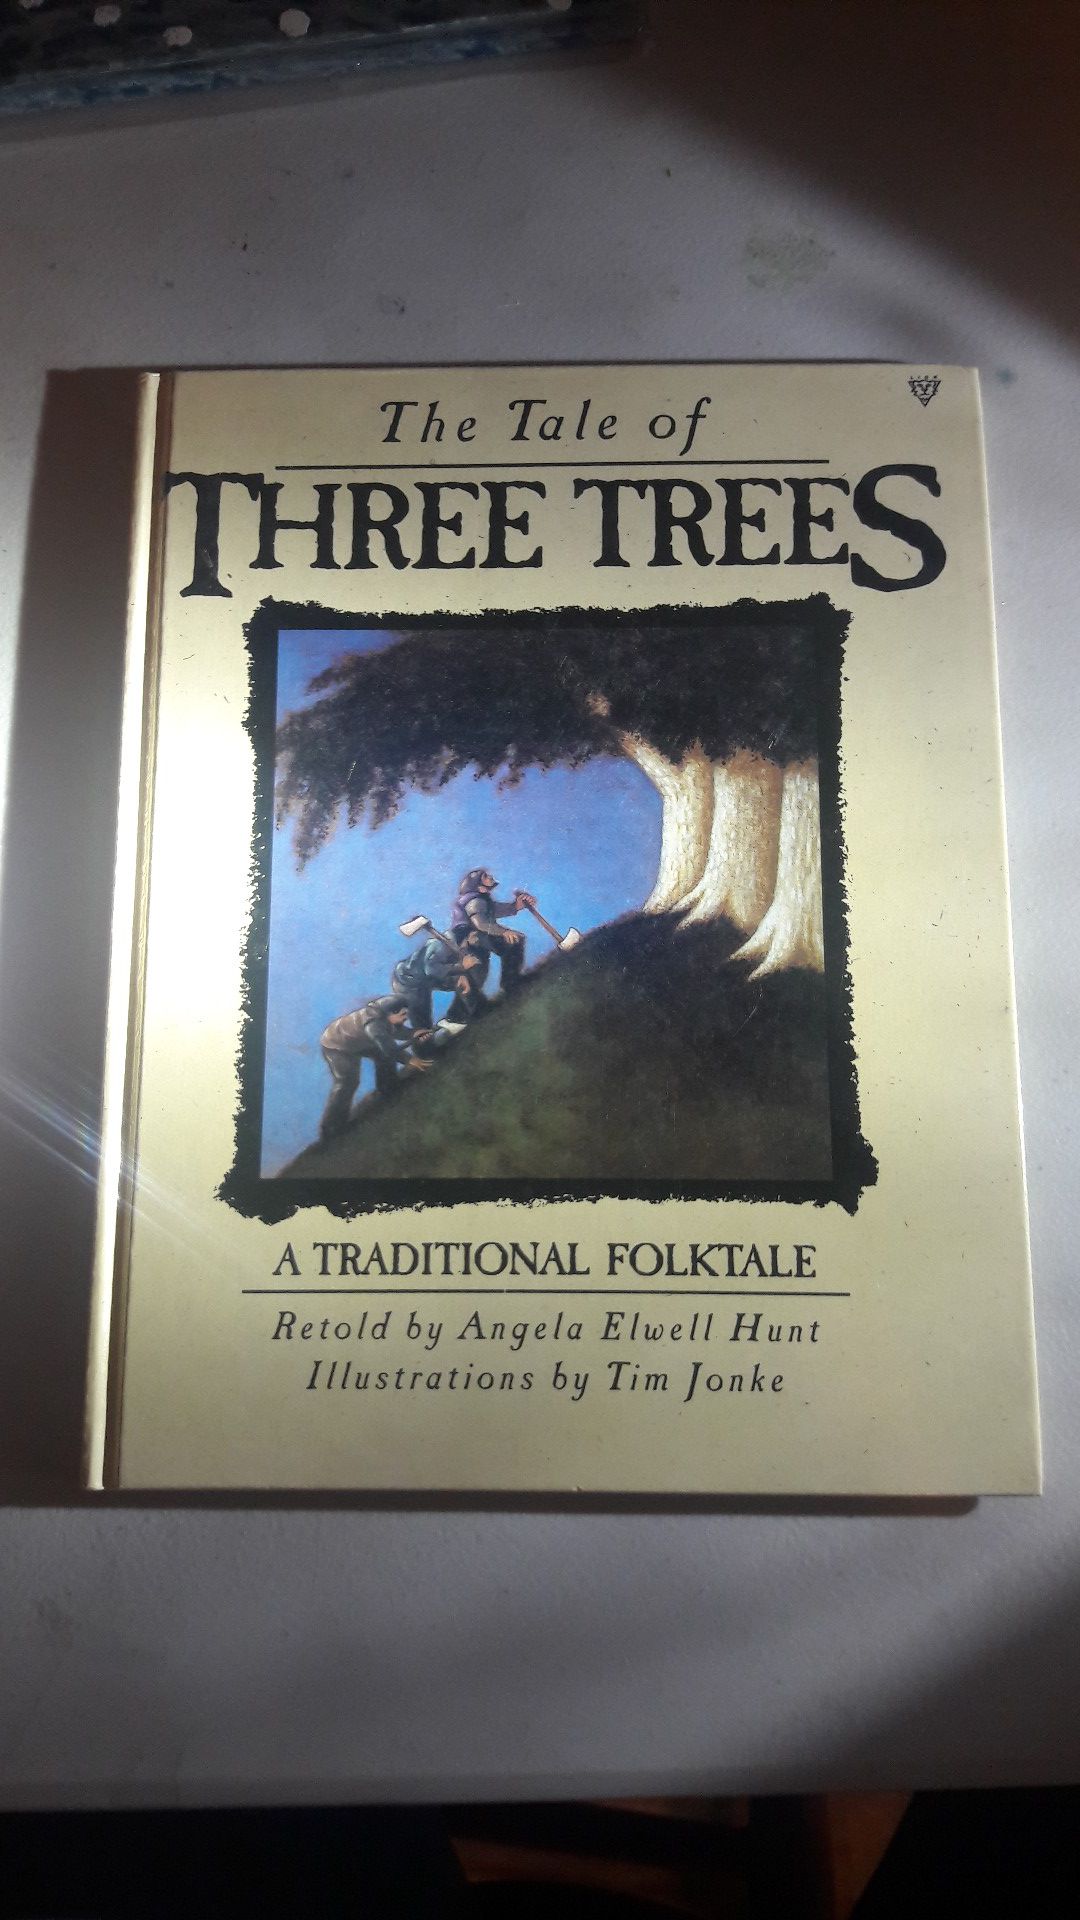 The tale of three trees.